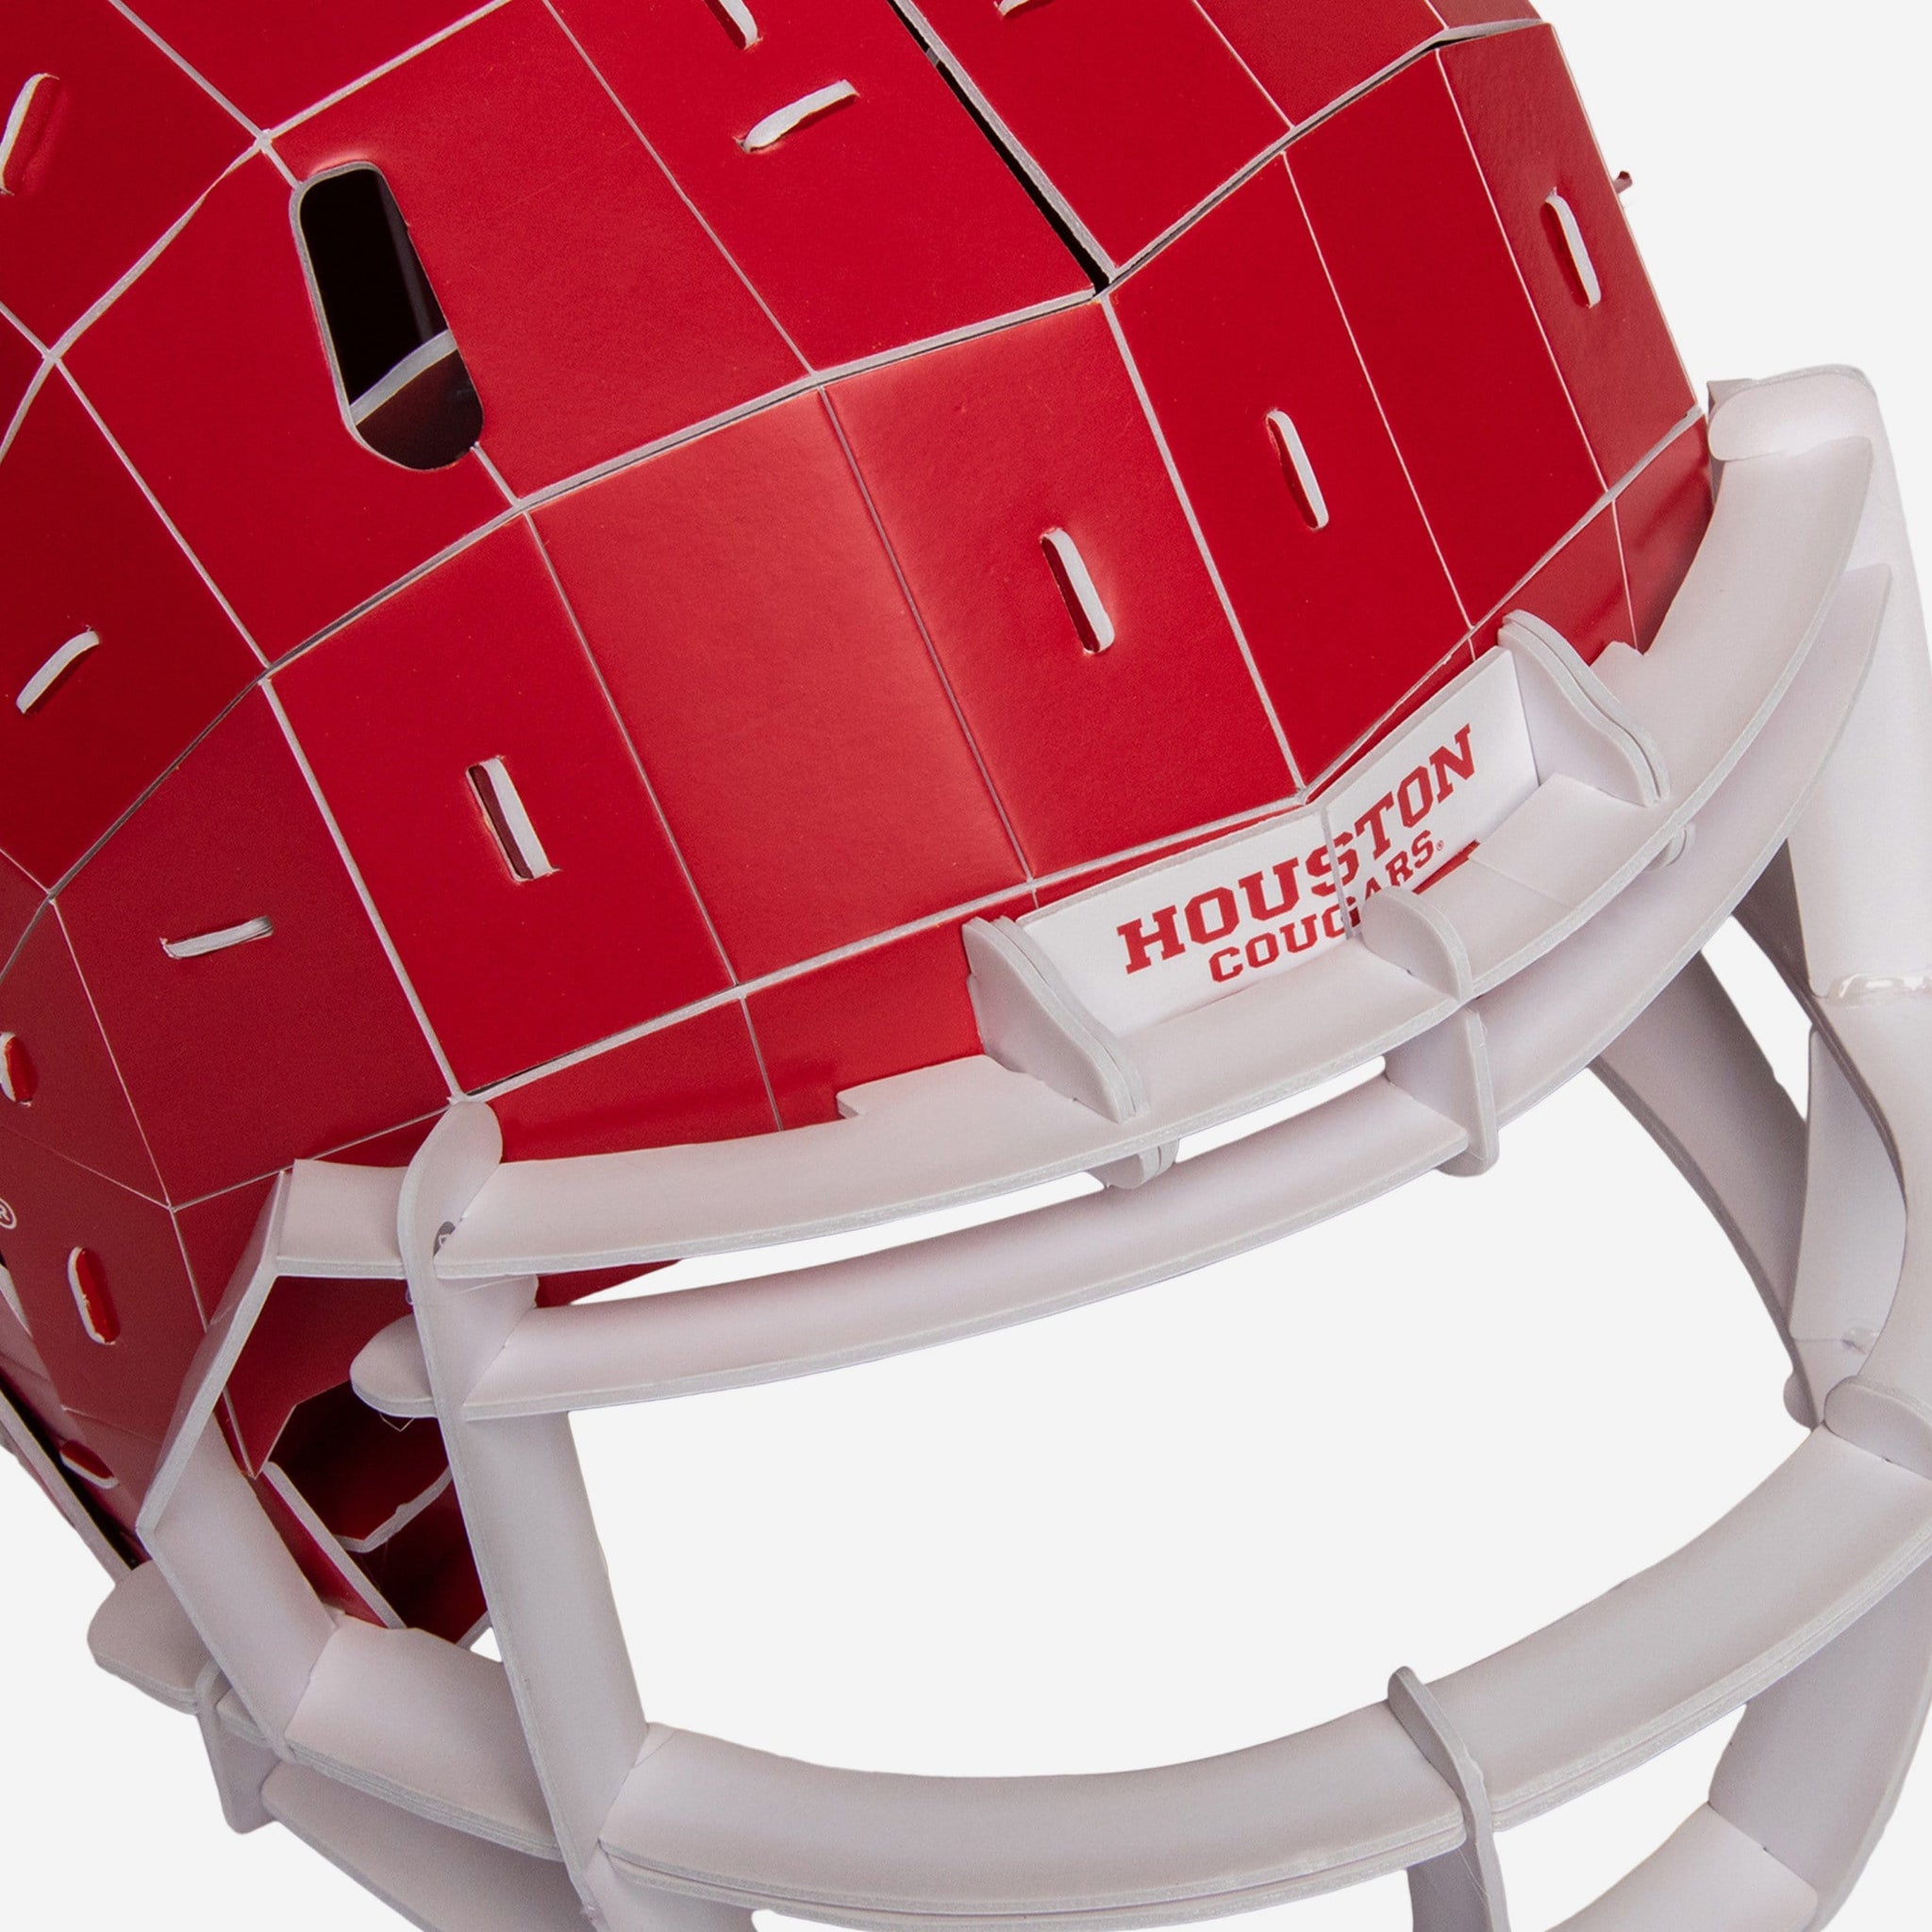 Houston Cougars legendary players gear